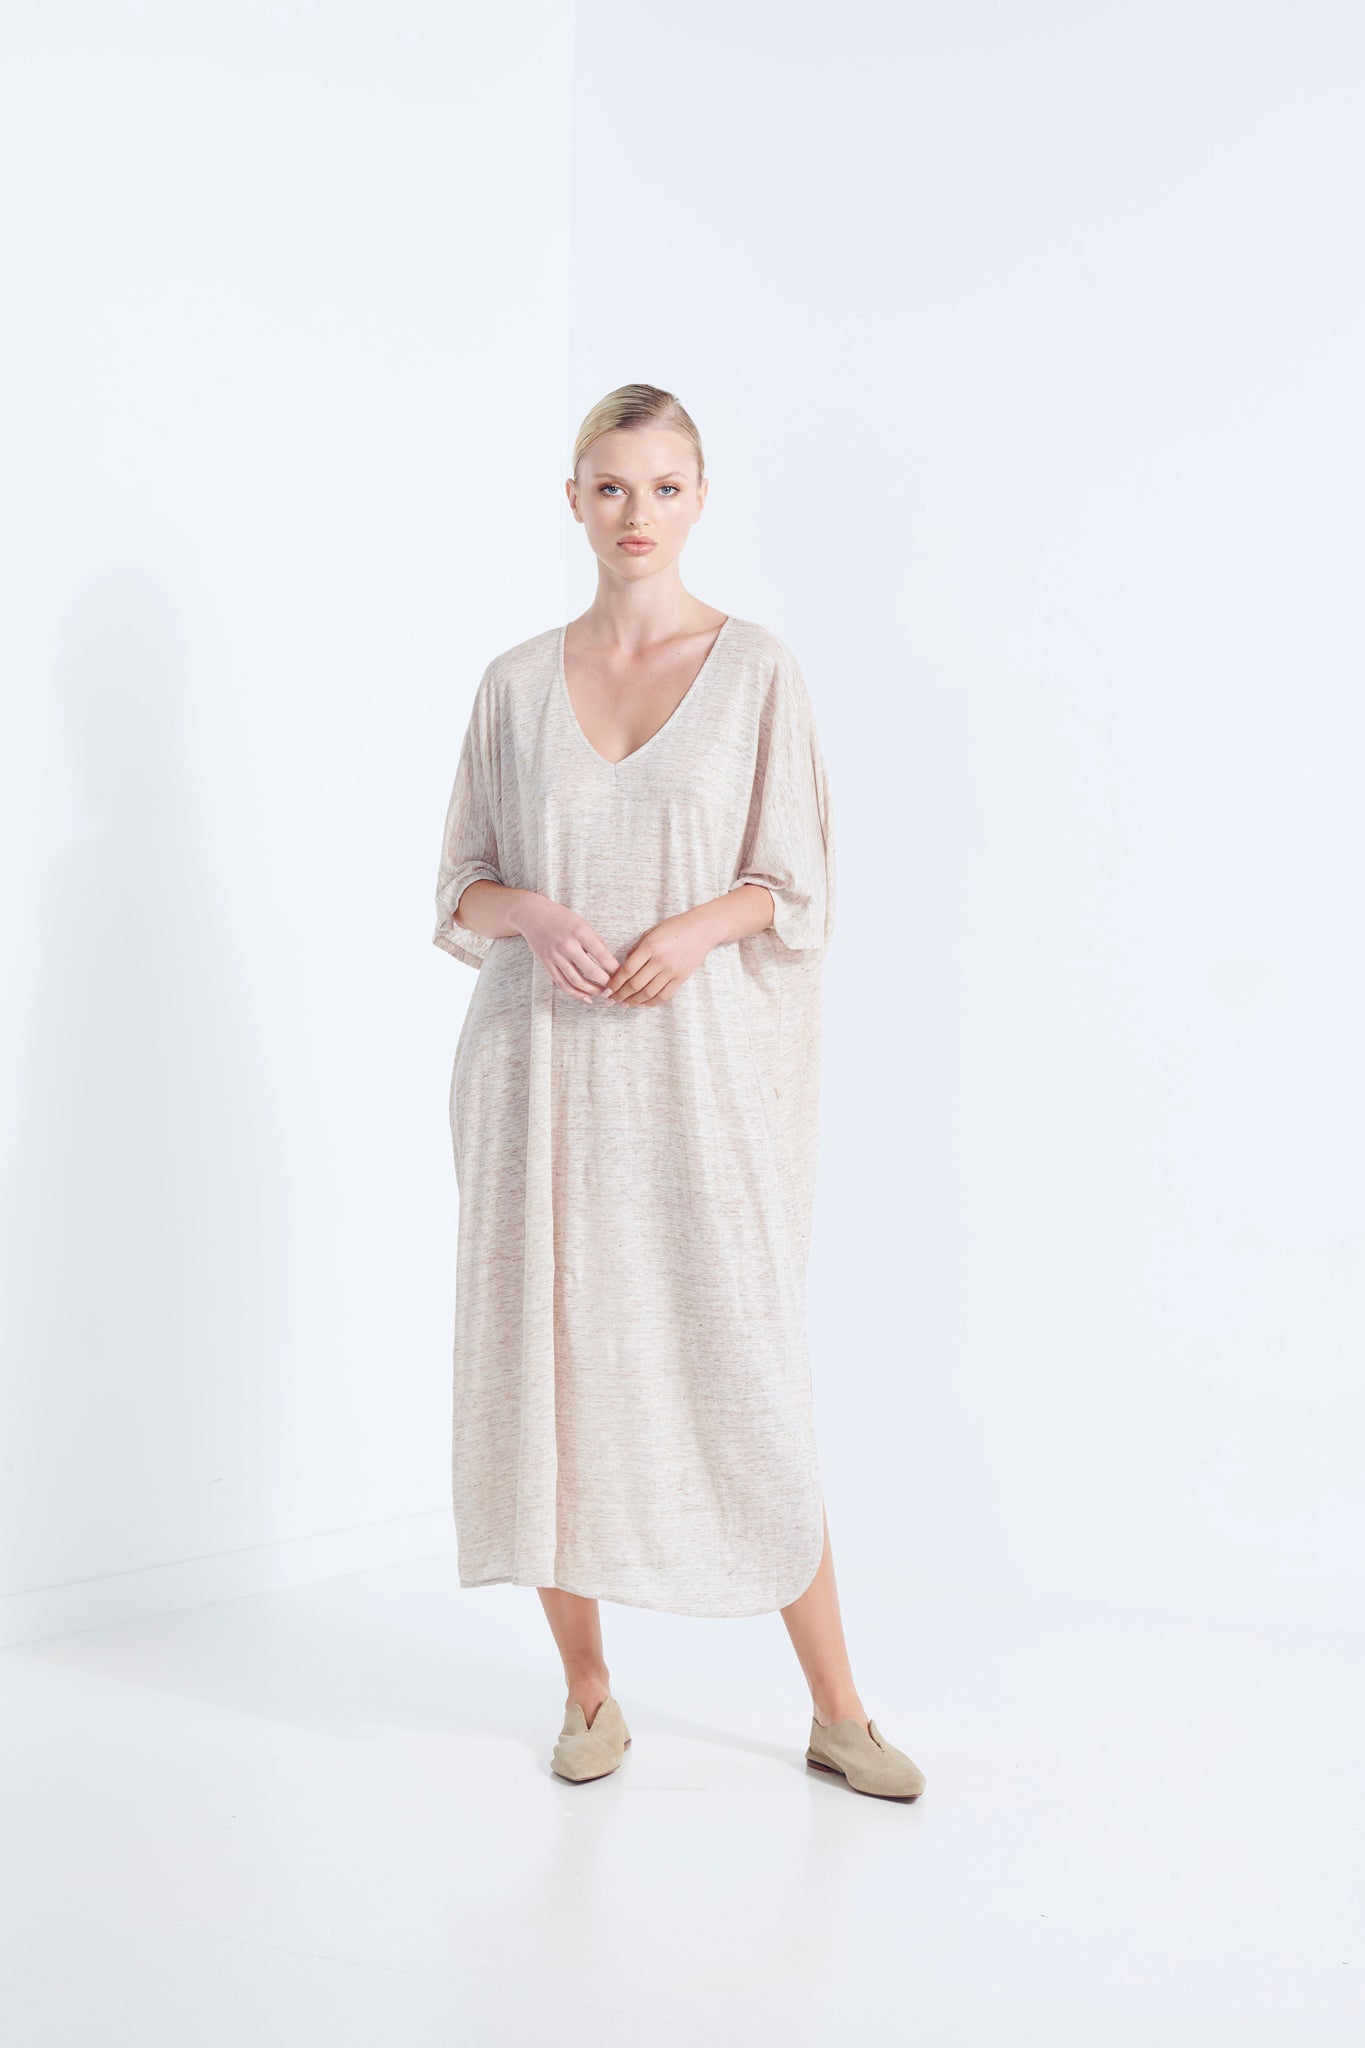 ZEUS DRESS PURE LINEN NATURAL YARN IN WICKER WITH SIDE HEM SCOOP AND SELF FABRIC TIE FRONT VIEW